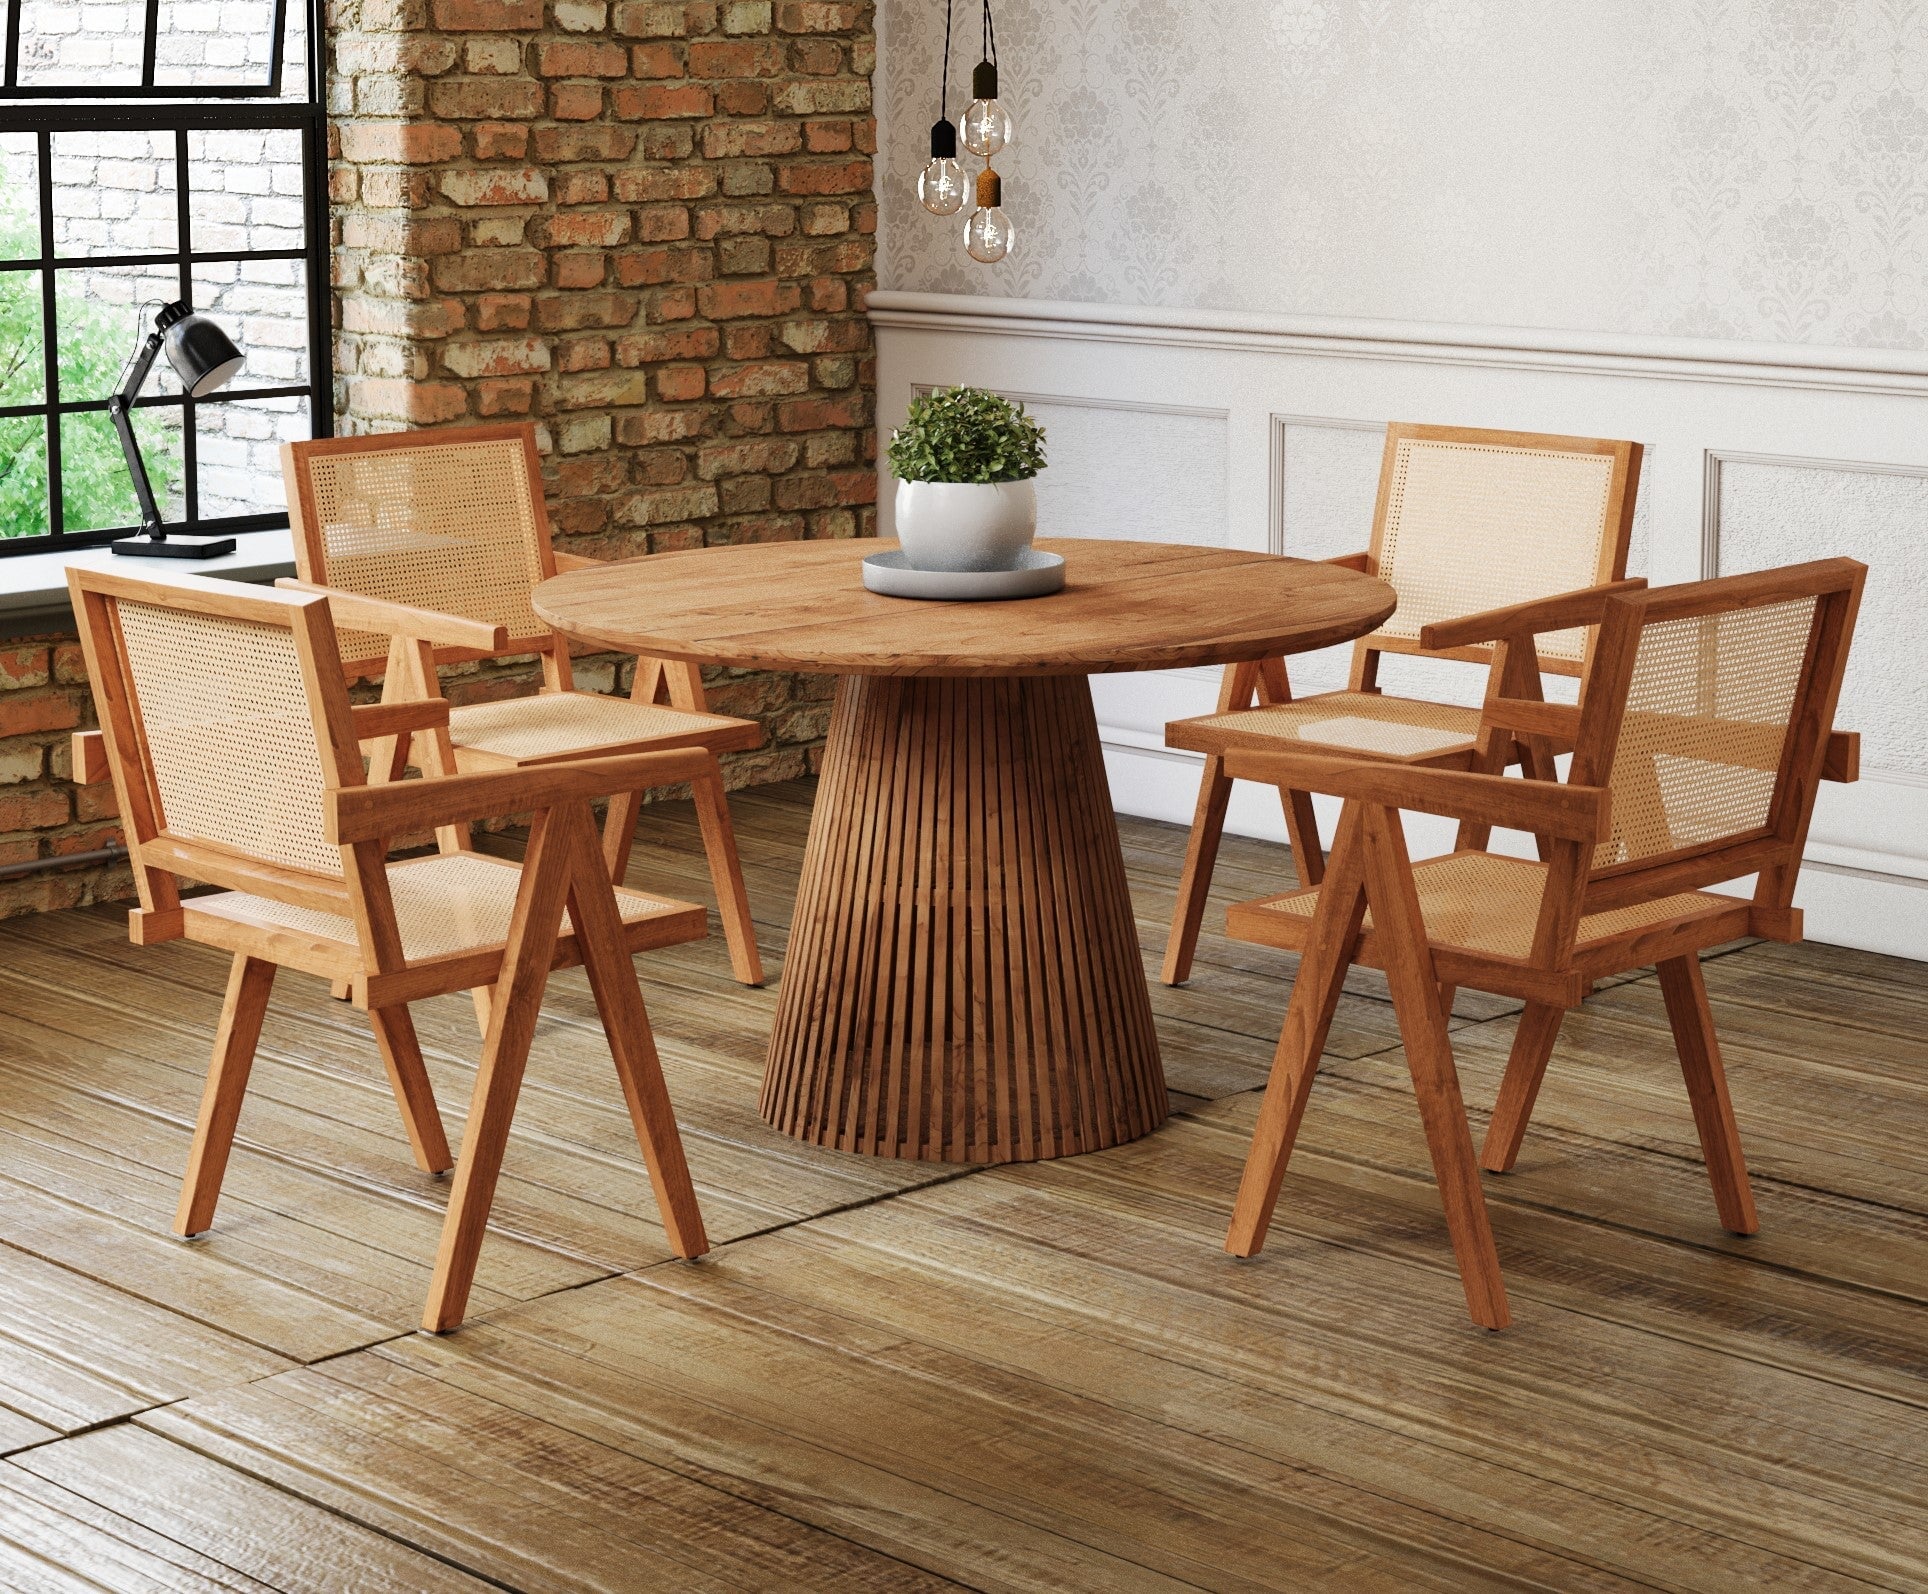 Round Flute Wood Dining Table & 4 x Pierre Jeanneret Chairs Set - Natural Acacia Wood Casa Maria Designs 